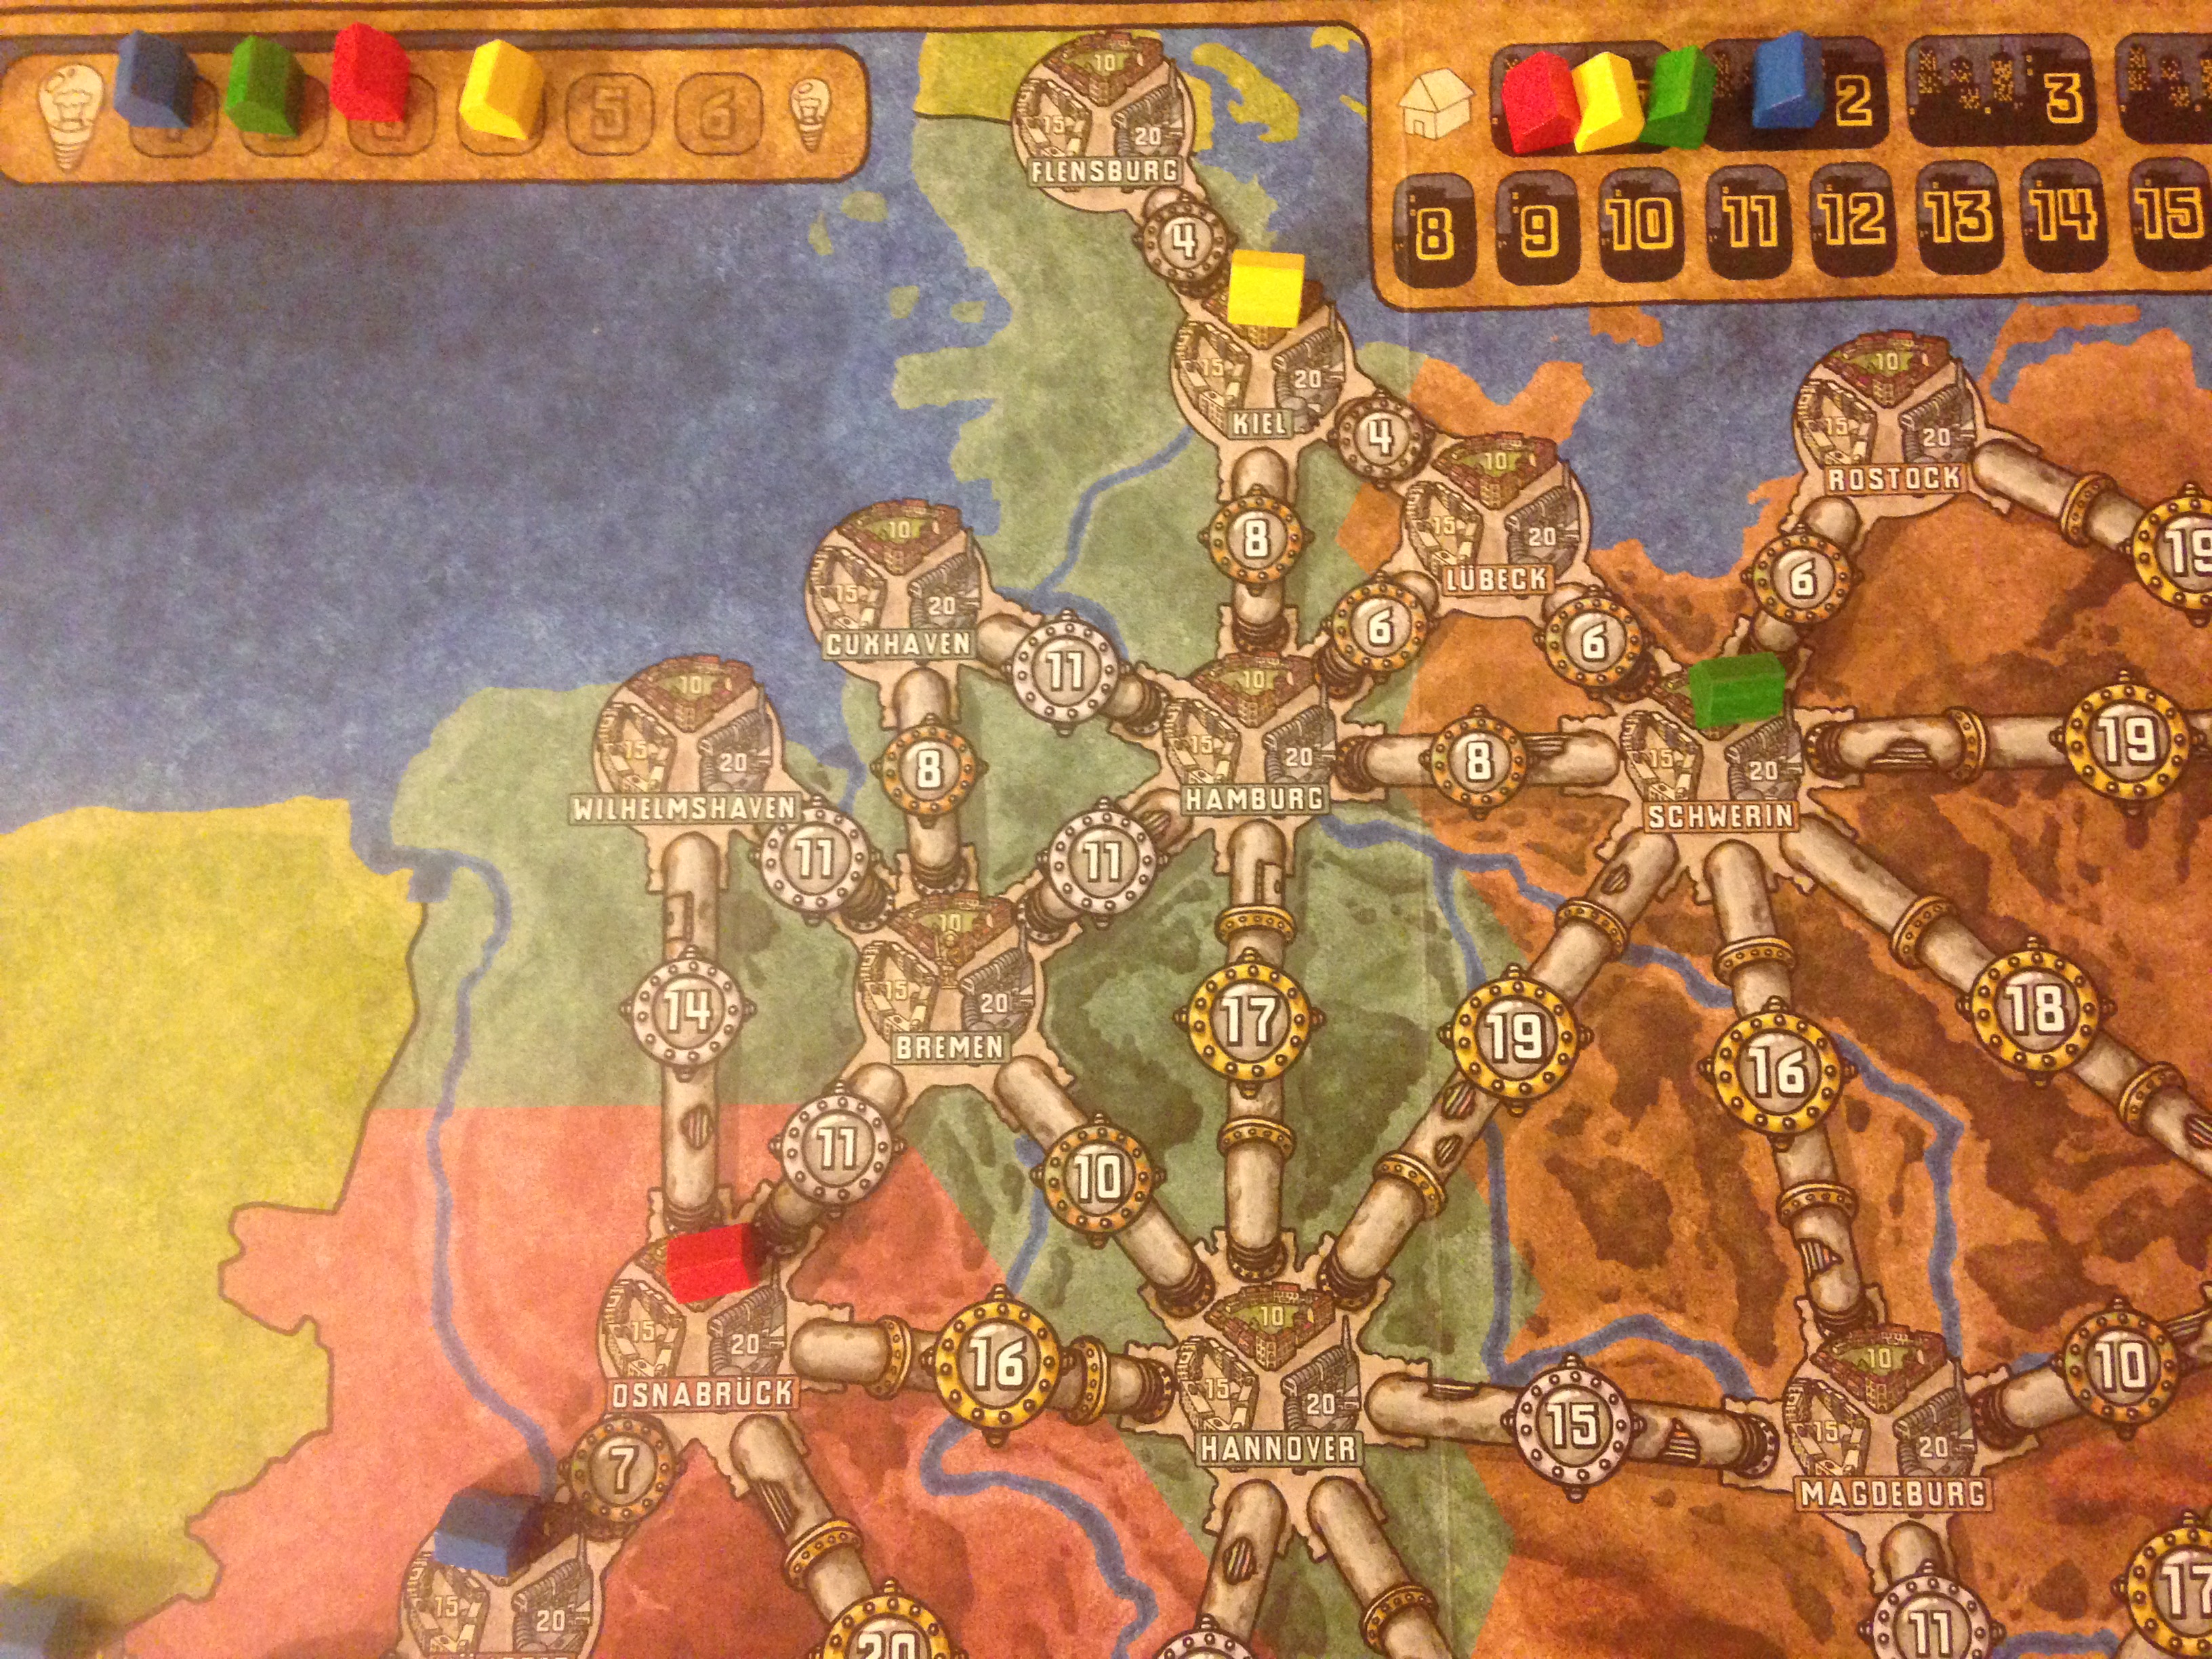 How the board looks when playing Power Grid